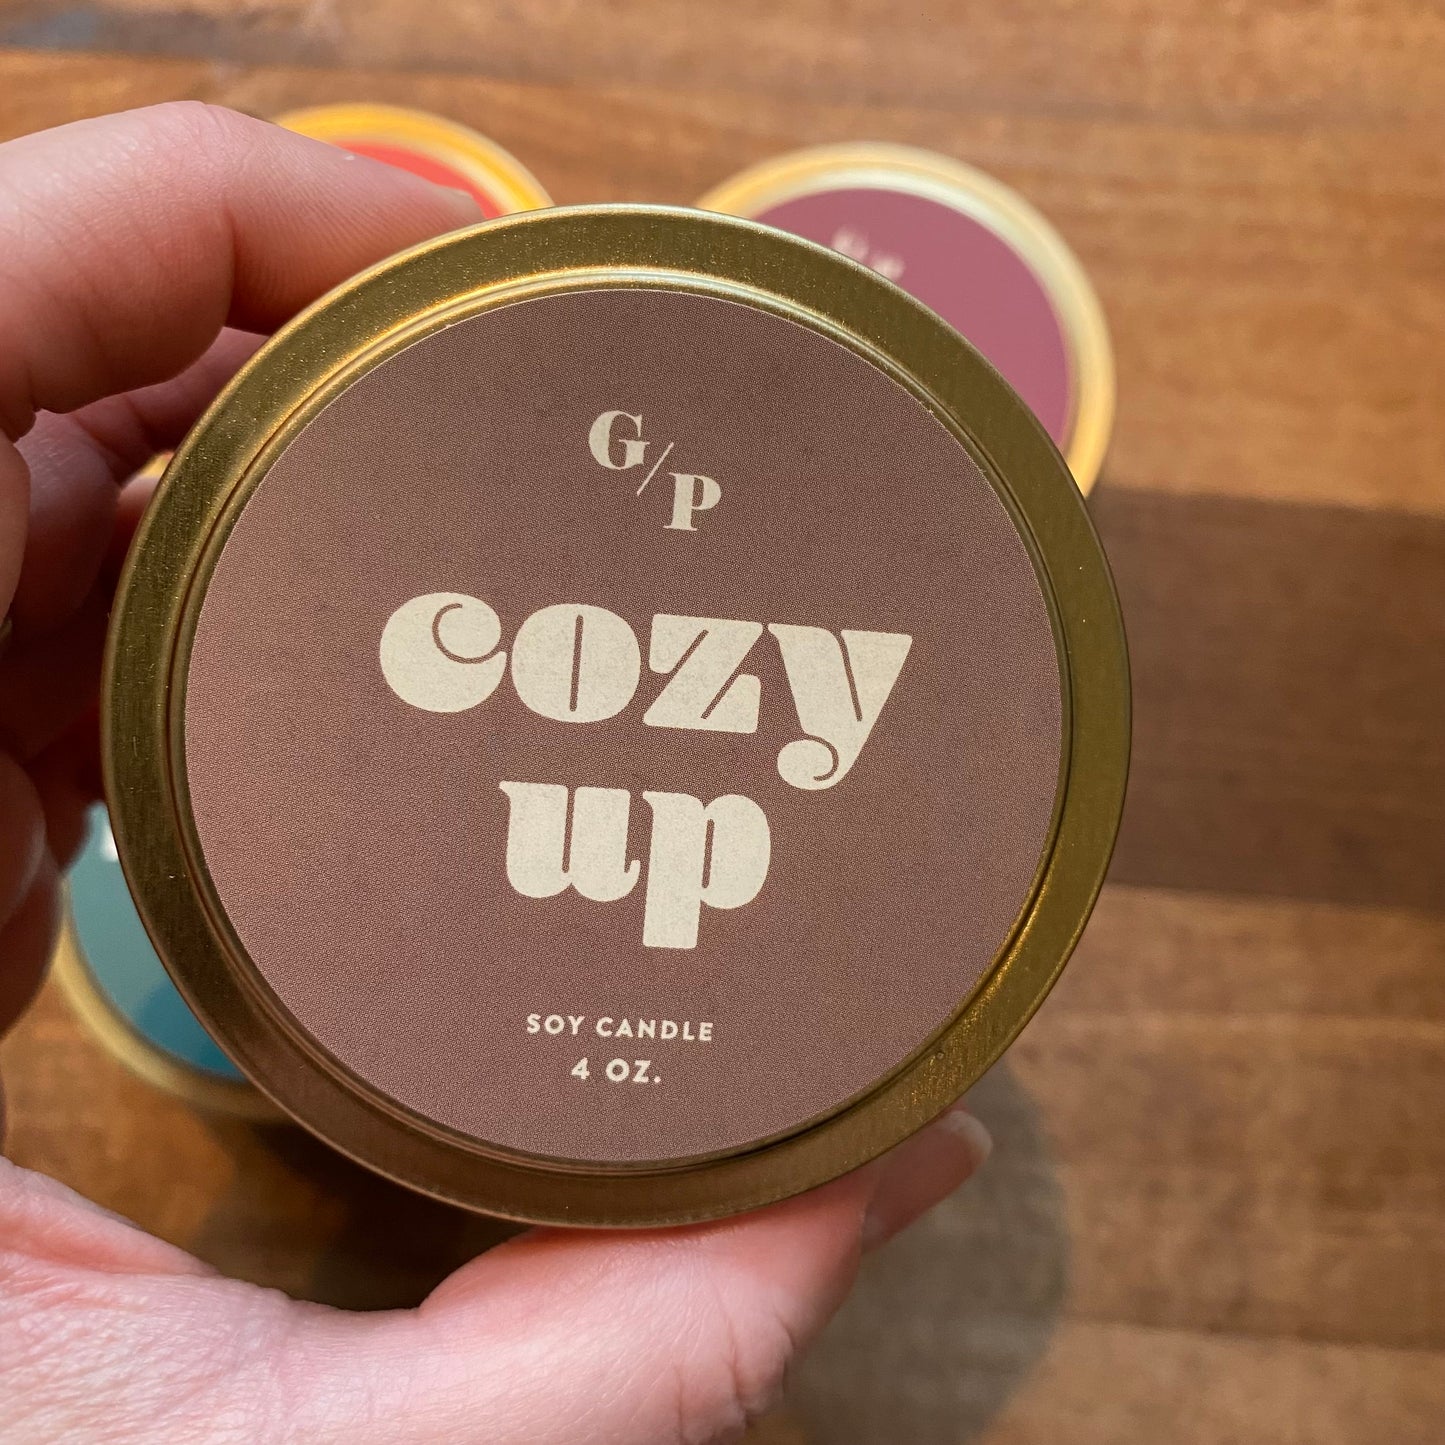 A hand holding a small Tin Collection Soy Candle II tin labeled "cozy up" by GP Candle Co.